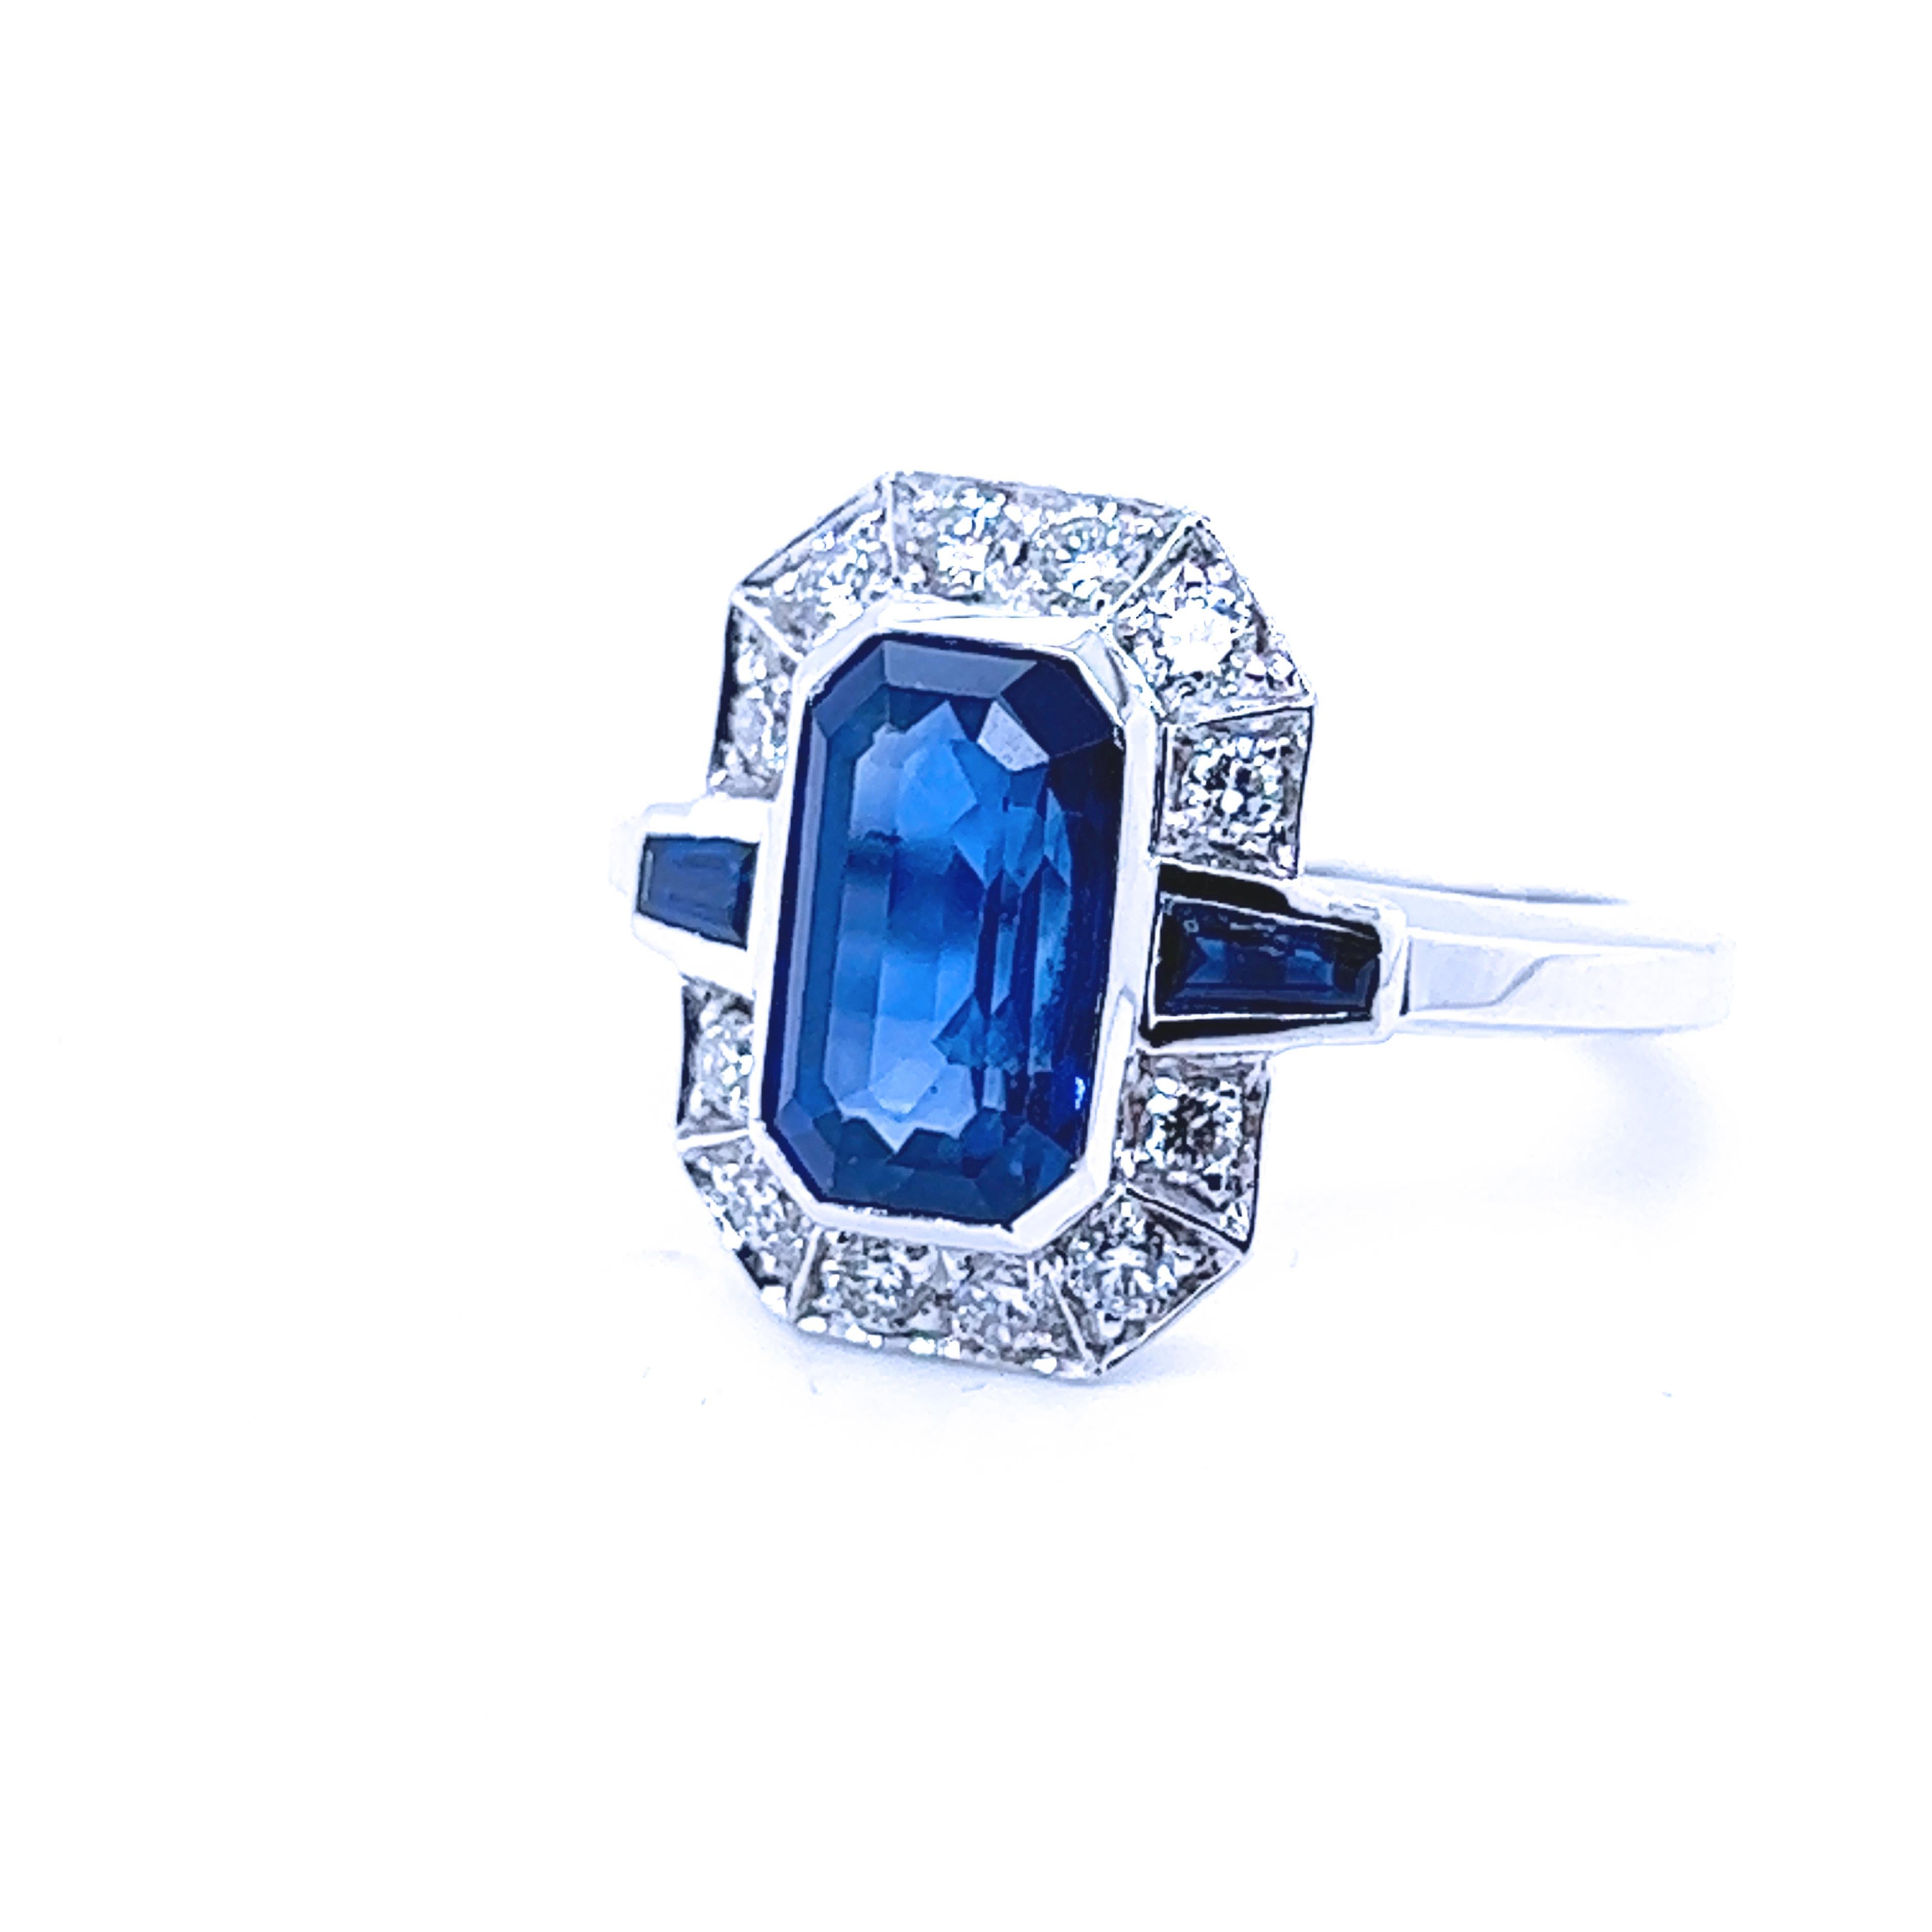 Berca 3.17kt Igi Certified Royal Blue Sapphire Emerald Cut Diamond Ring In New Condition For Sale In Valenza, IT